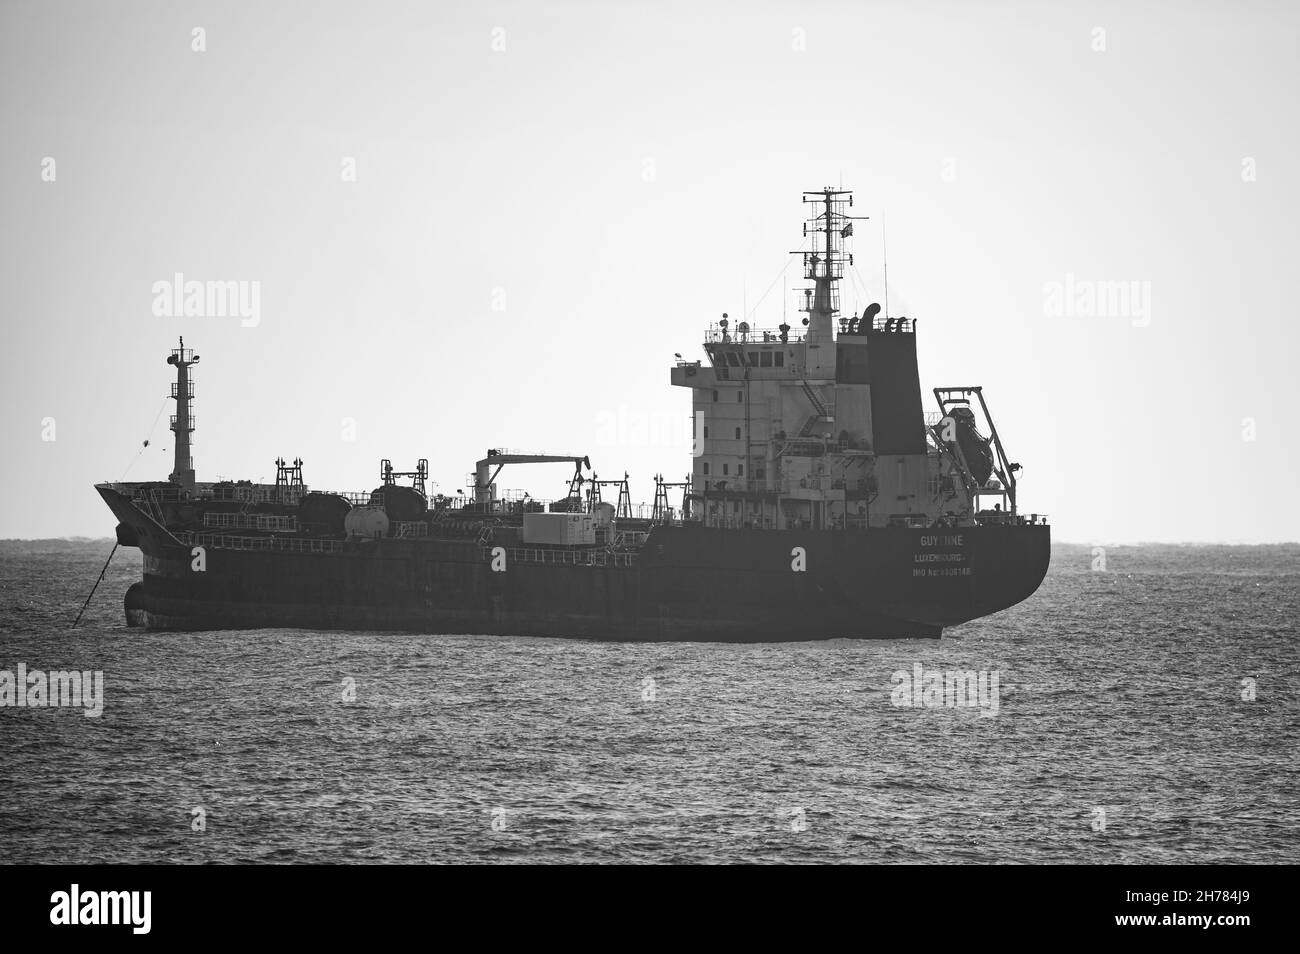 BARCELONA, SPAIN - Jan 18, 2021: A grayscale shot of a large oil tanker navigating the sea Stock Photo